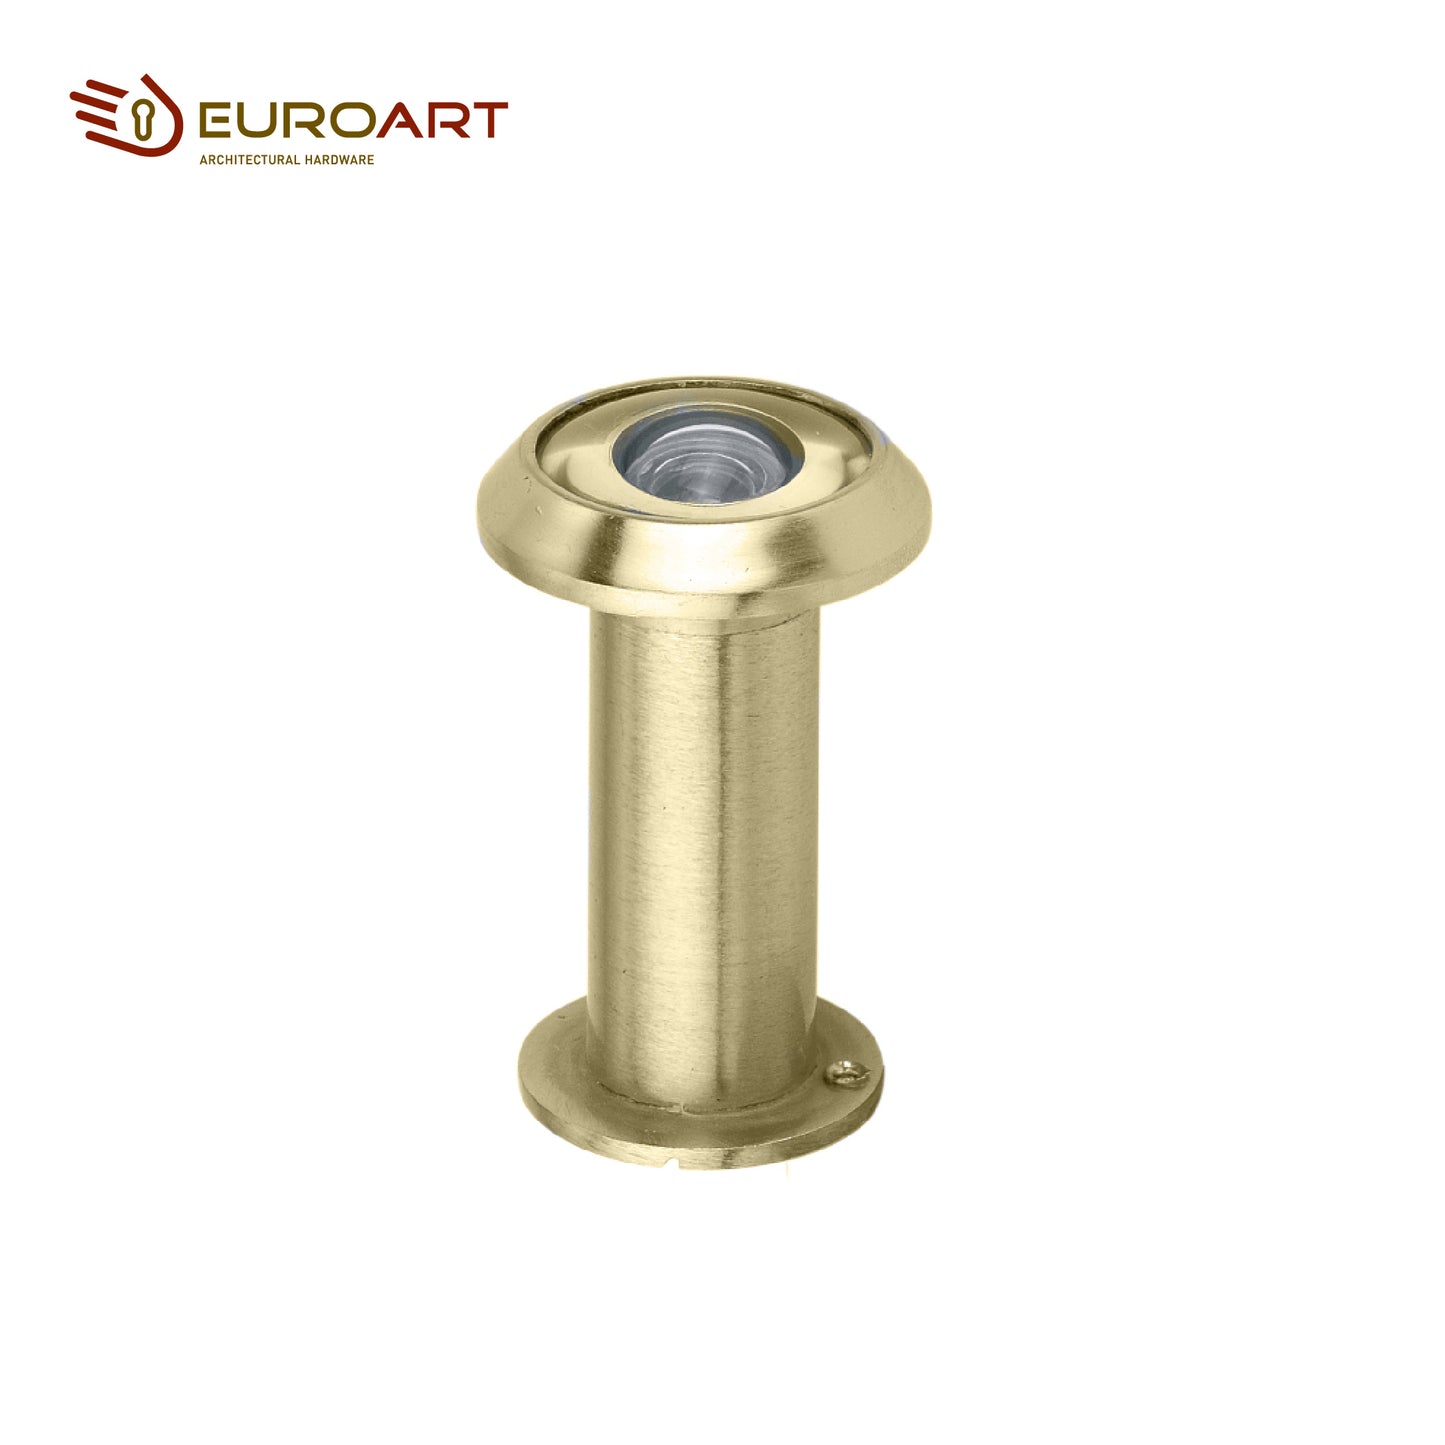 Euroart Door Viewer with Glass Lens and Optional Cover, 180° Viewing Angle (Door Thickness 35-60mm) Brass - DV101